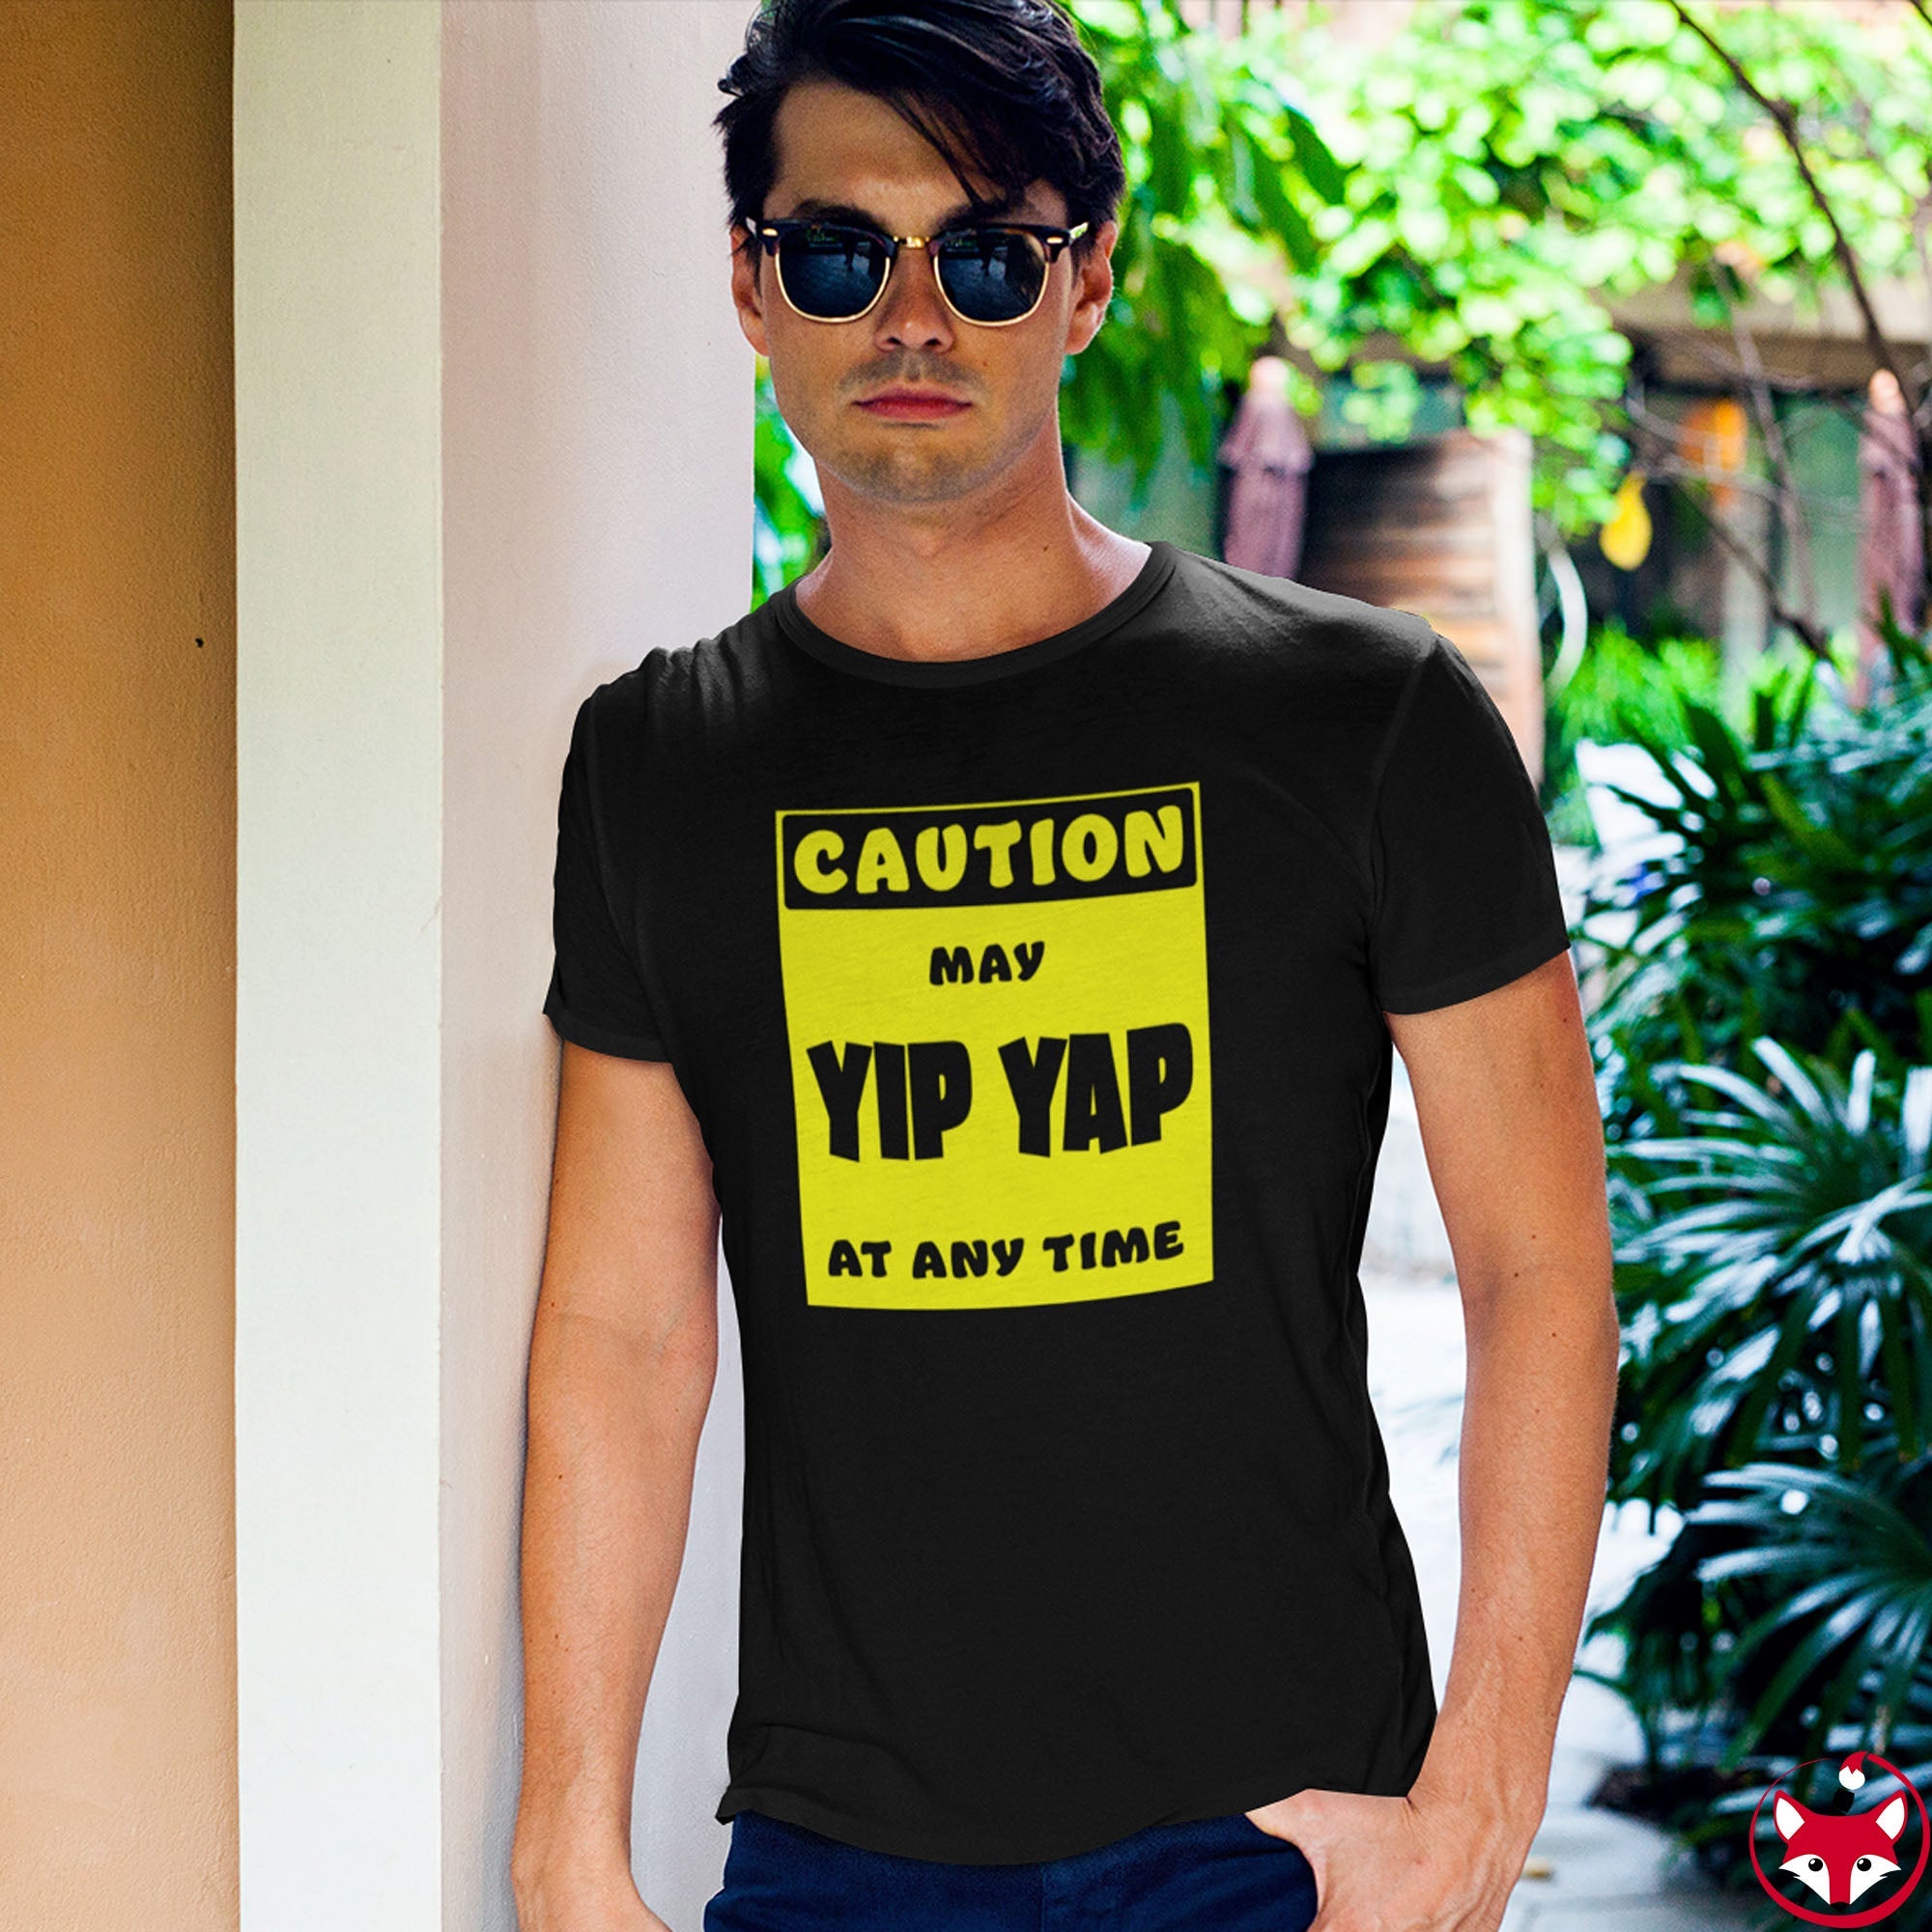 CAUTION! May Yip Yap at any time! - T-Shirt T-Shirt AFLT-Whootorca 